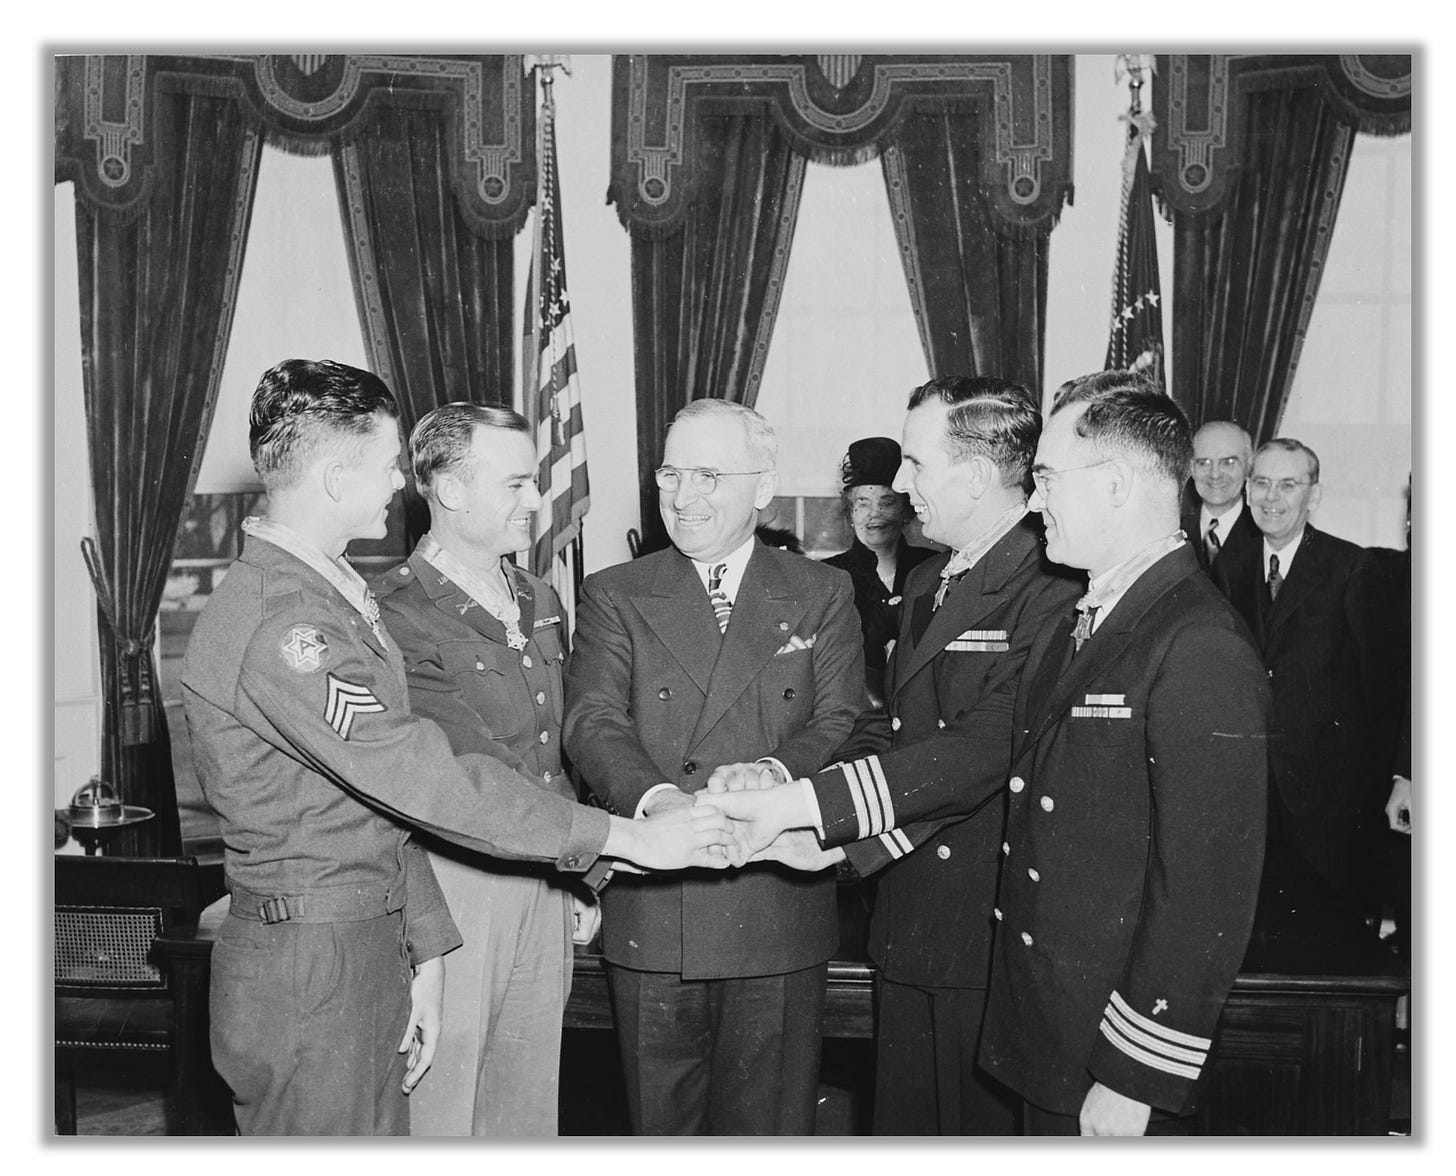 Harry Truman is shown with four Medal of Honor recipients: John McKinney, Daniel Lee, Donald Gary, and Joseph O'Callahan.